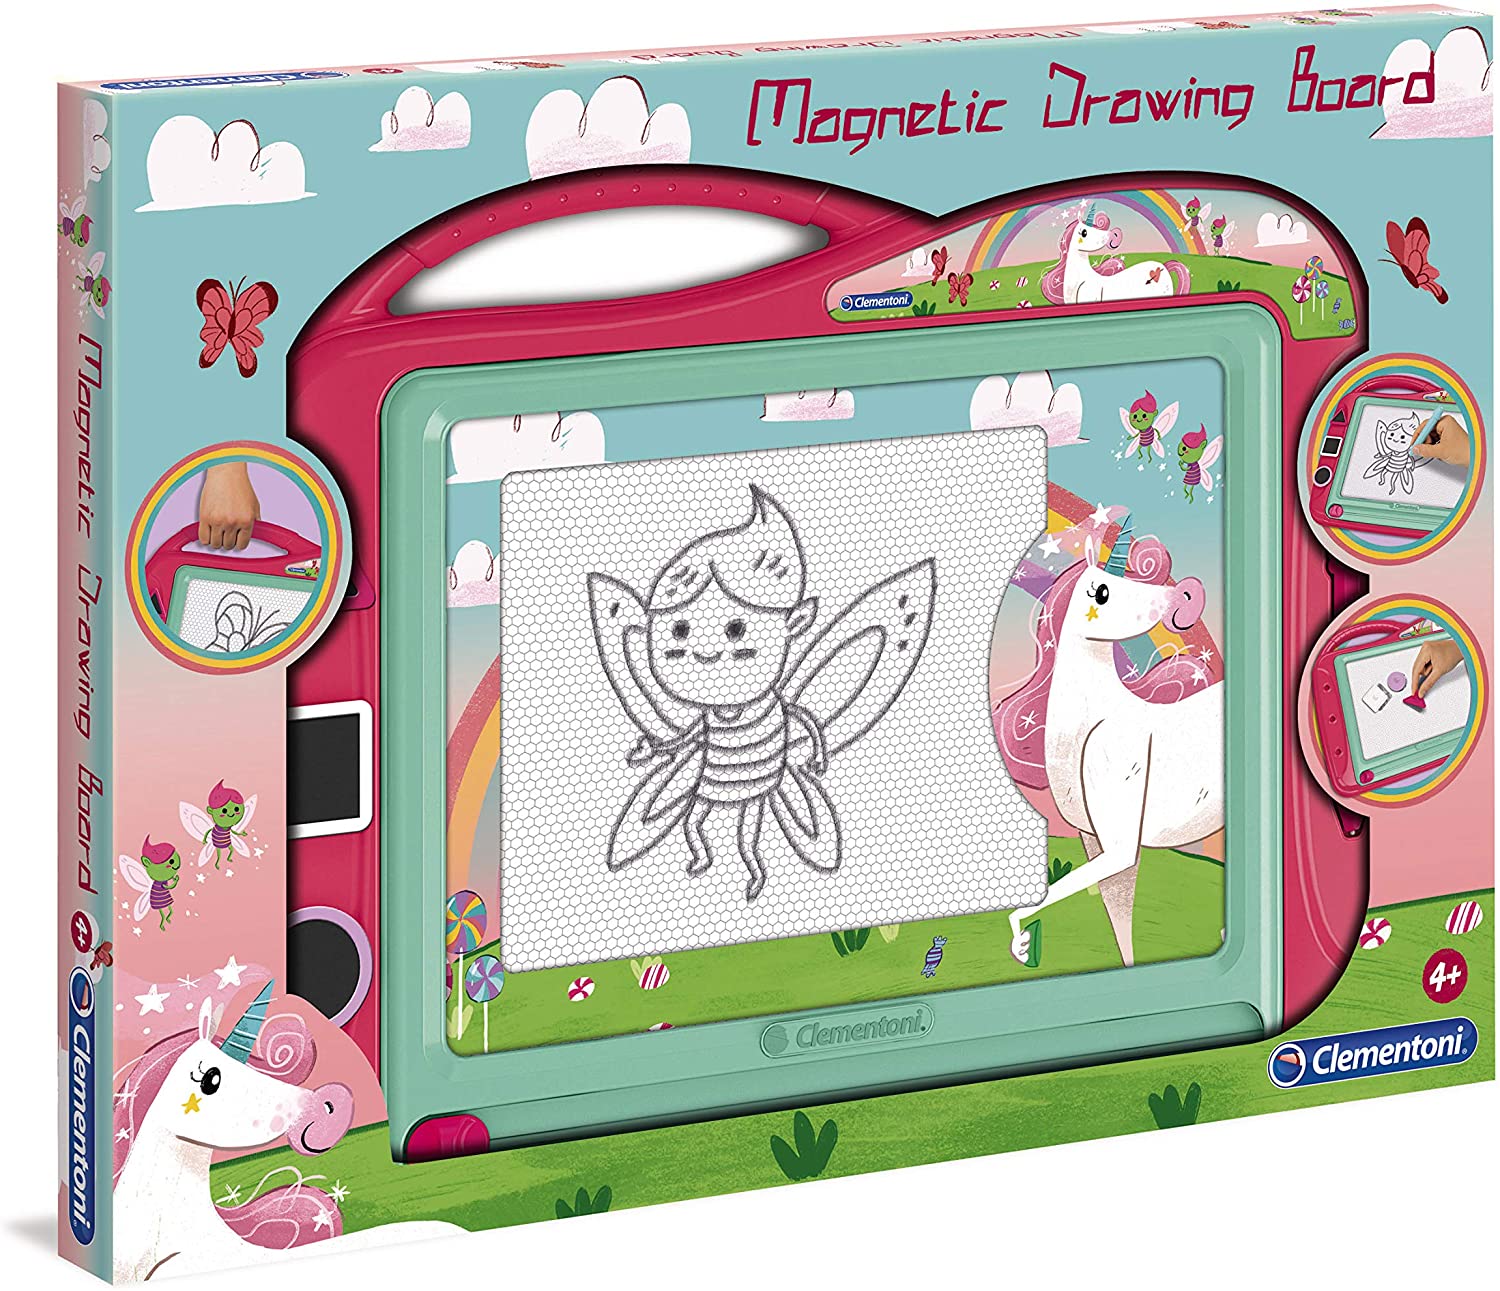 Clementoni 18569 Magic Board Unicorns Magnetic Drawing Board For Ages 4 Yea